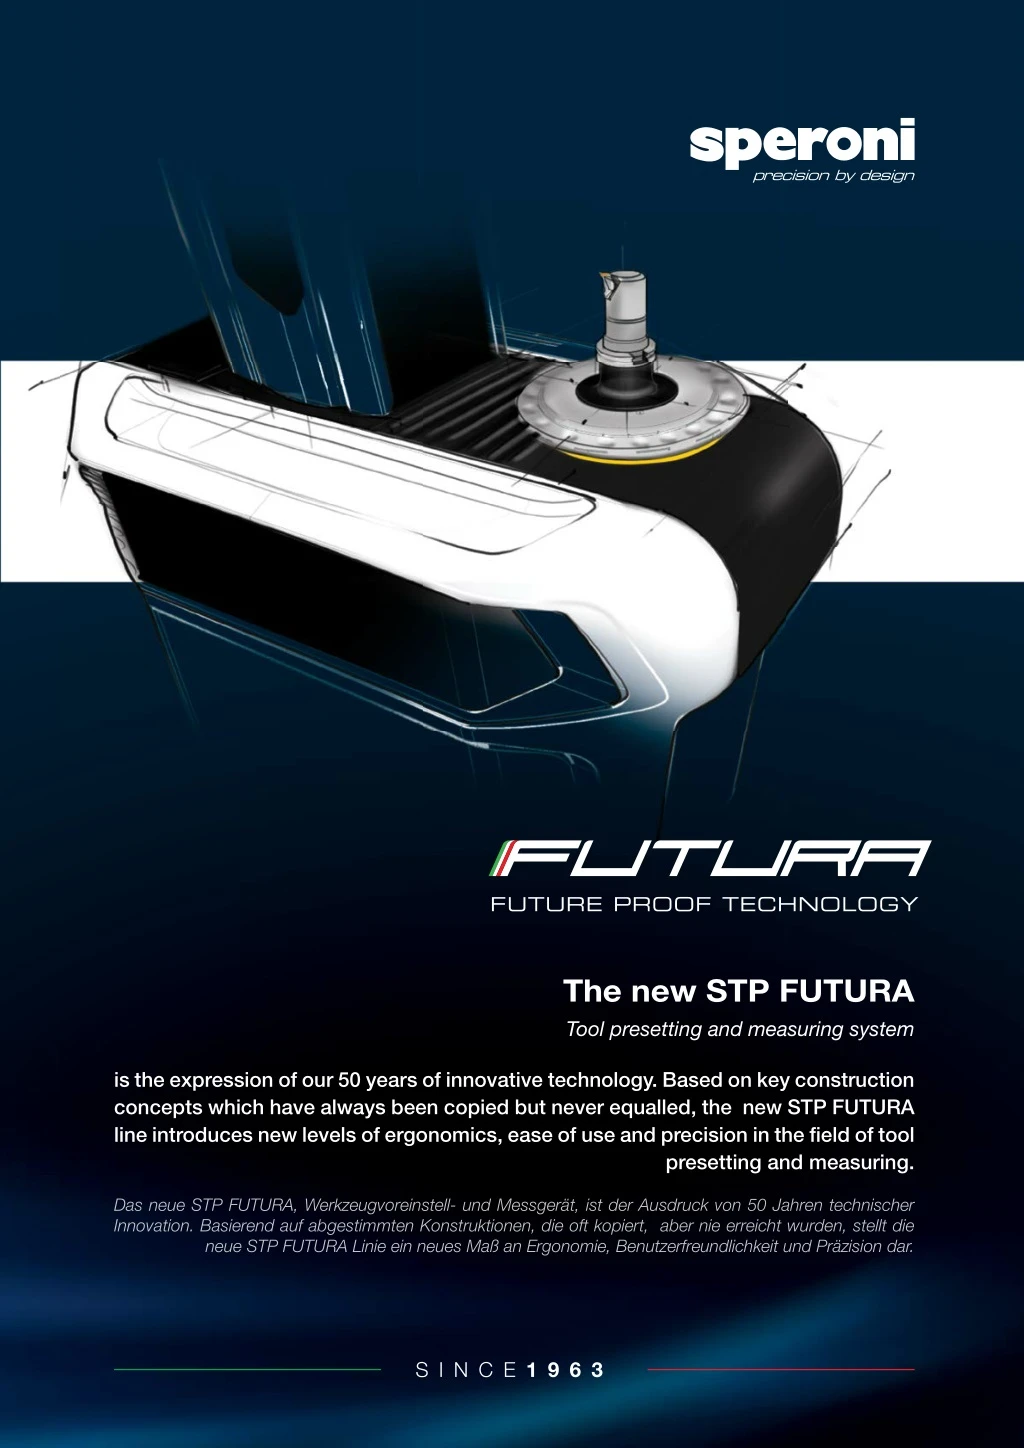 the new stp futura tool presetting and measuring